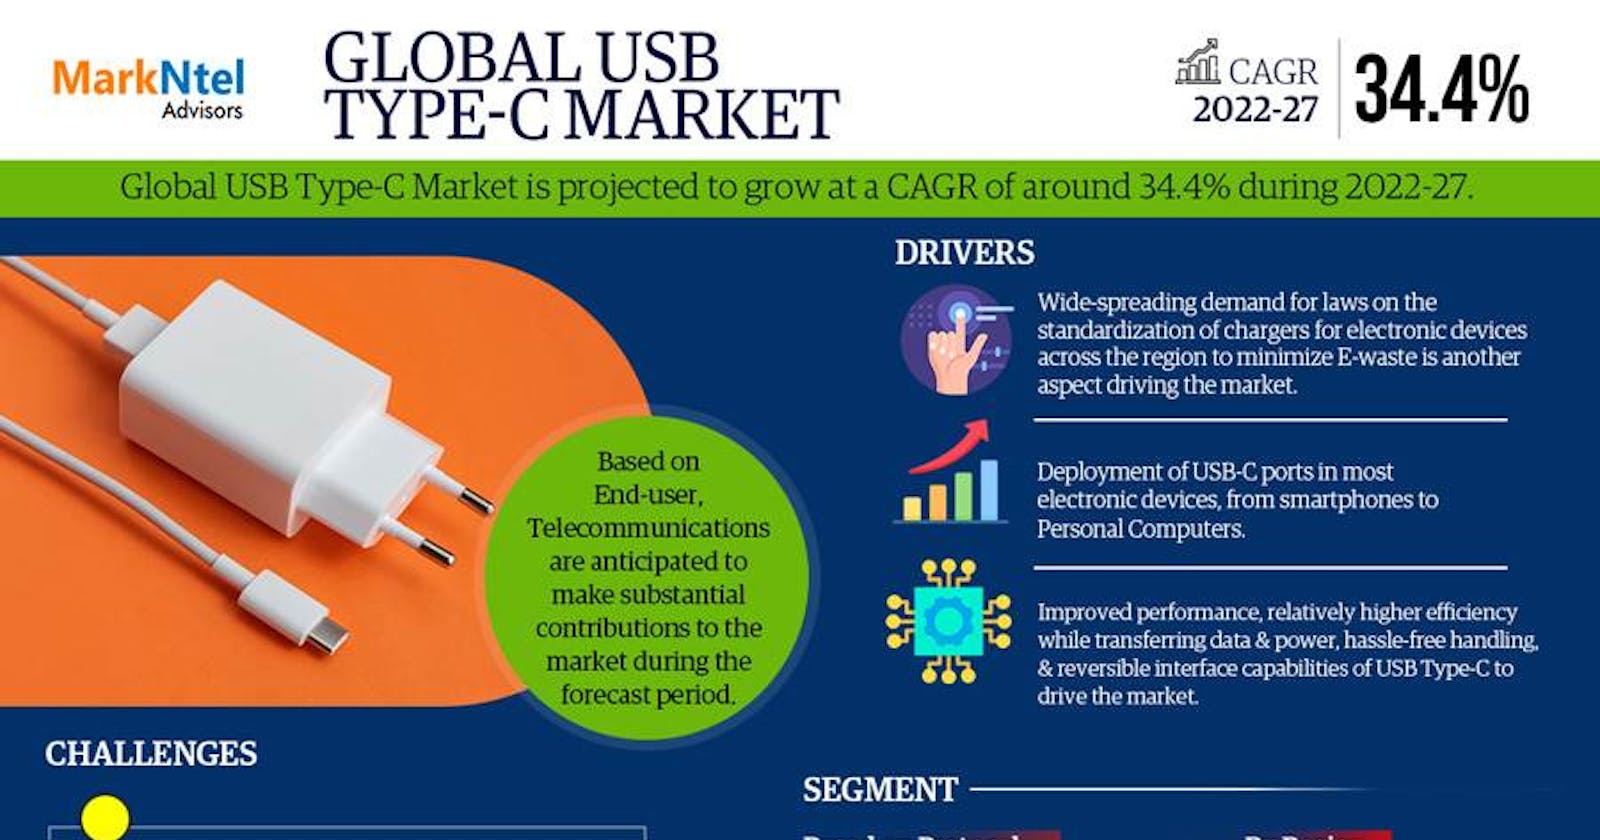 USB Type-C Market Share, Size, and Growth Forecast: 34.4% CAGR (2022-27)